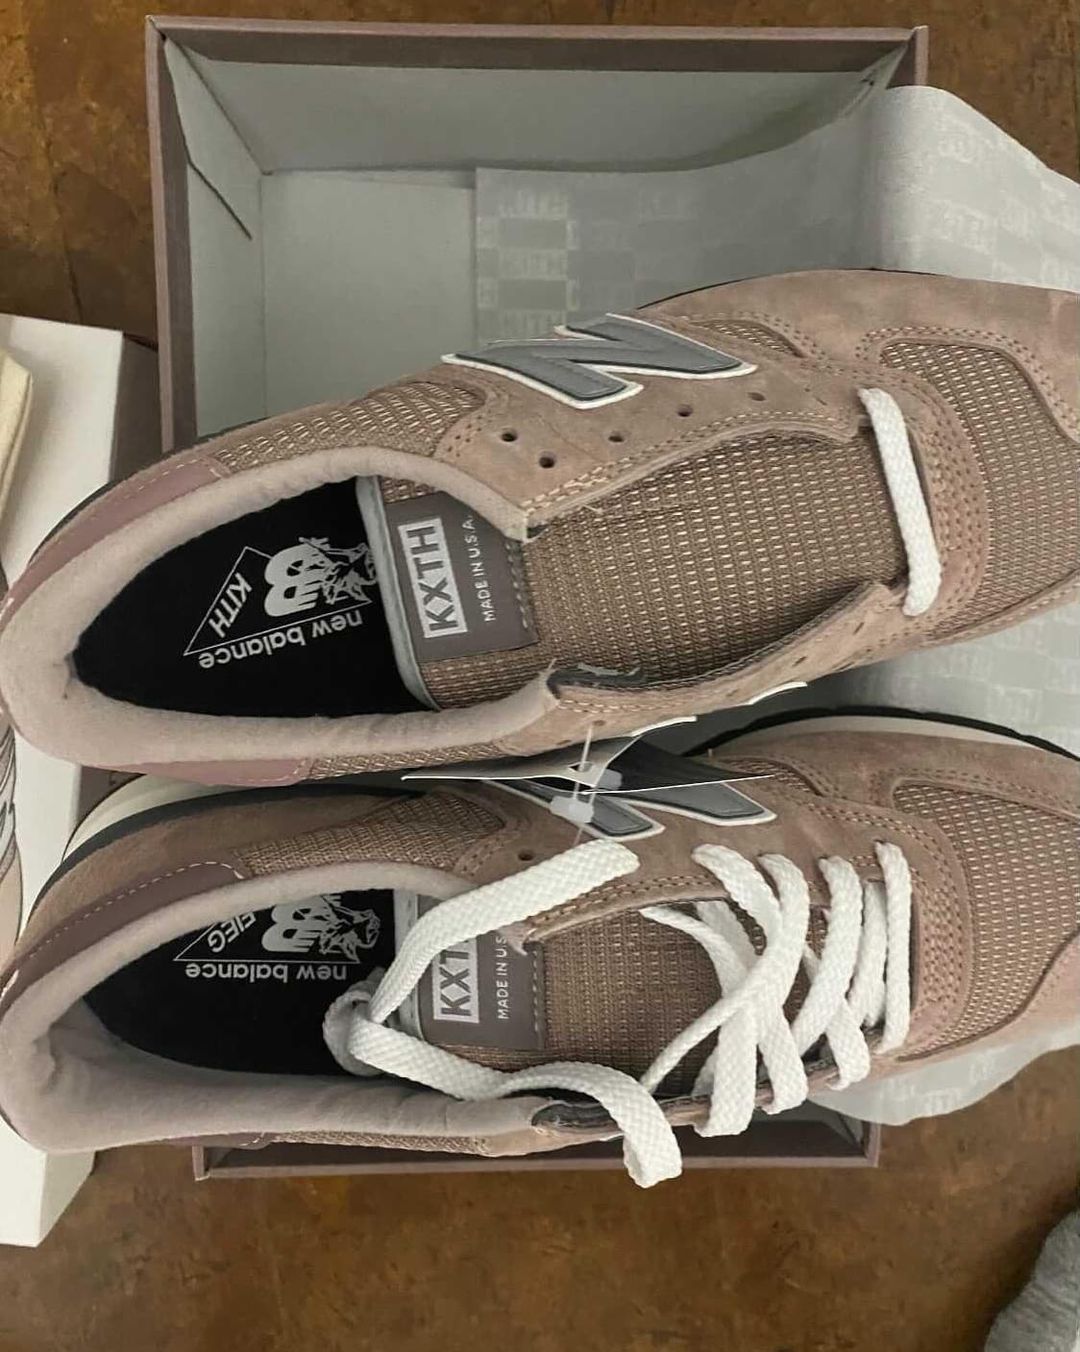 Kith New Balance 990v1 Dusty Rose M990KT1 Release Date Info